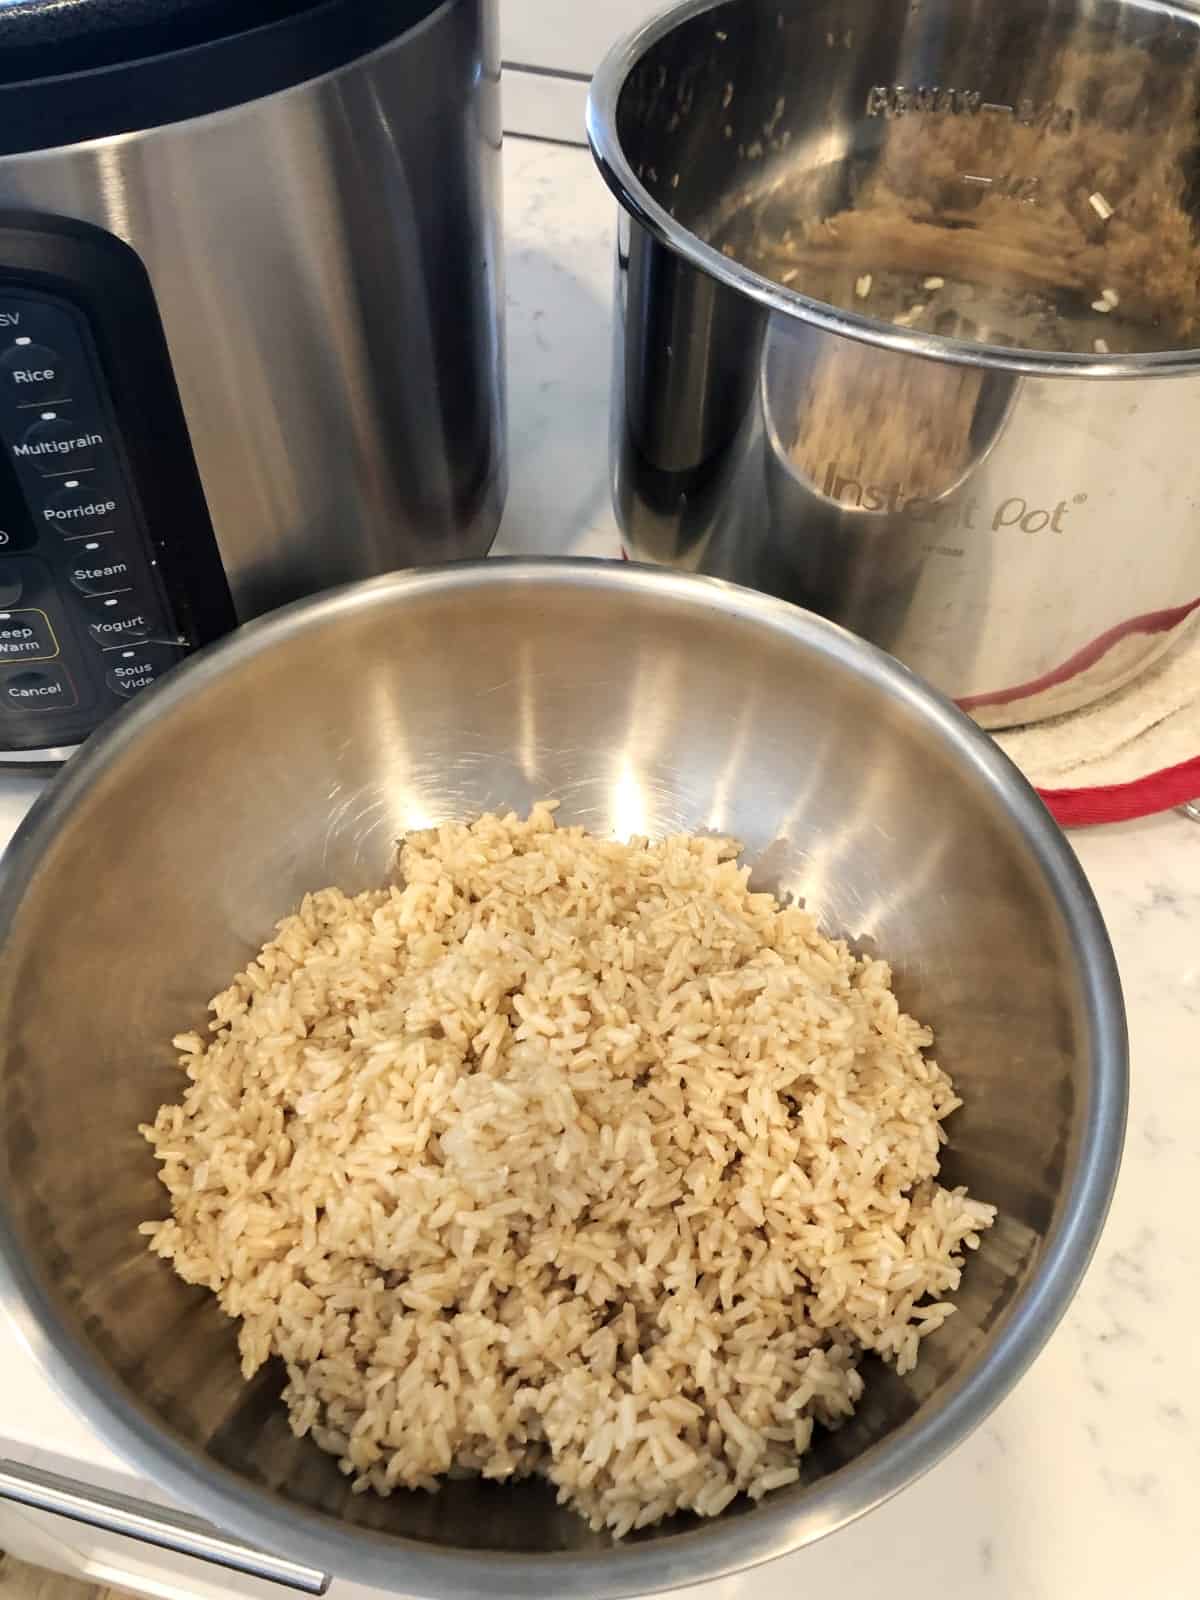 Cooked brown rice in stainless bowl with Instant Pot in the background.